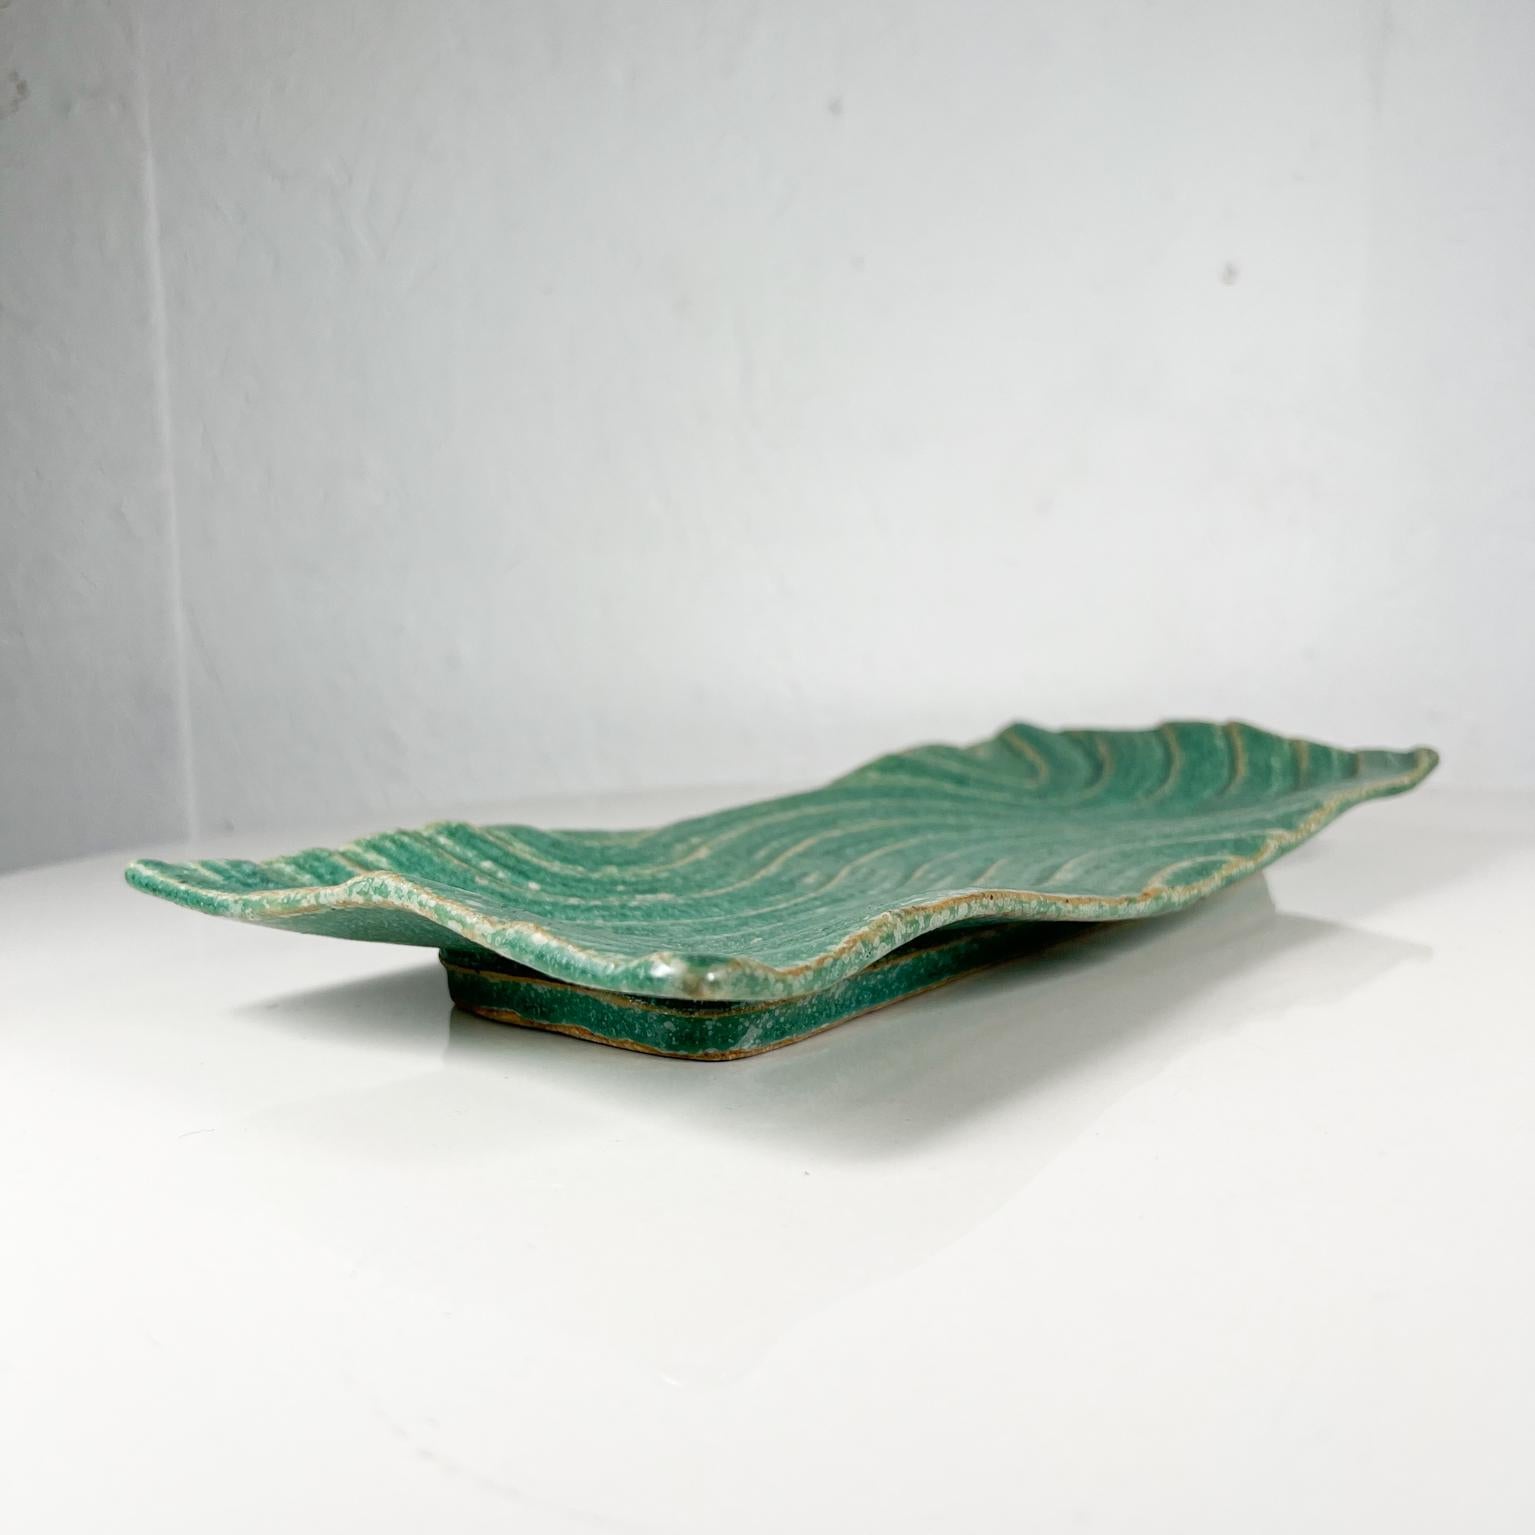 1970s Sculptural Green Wave Dish Studio Pottery Art Ed Thompson For Sale 4